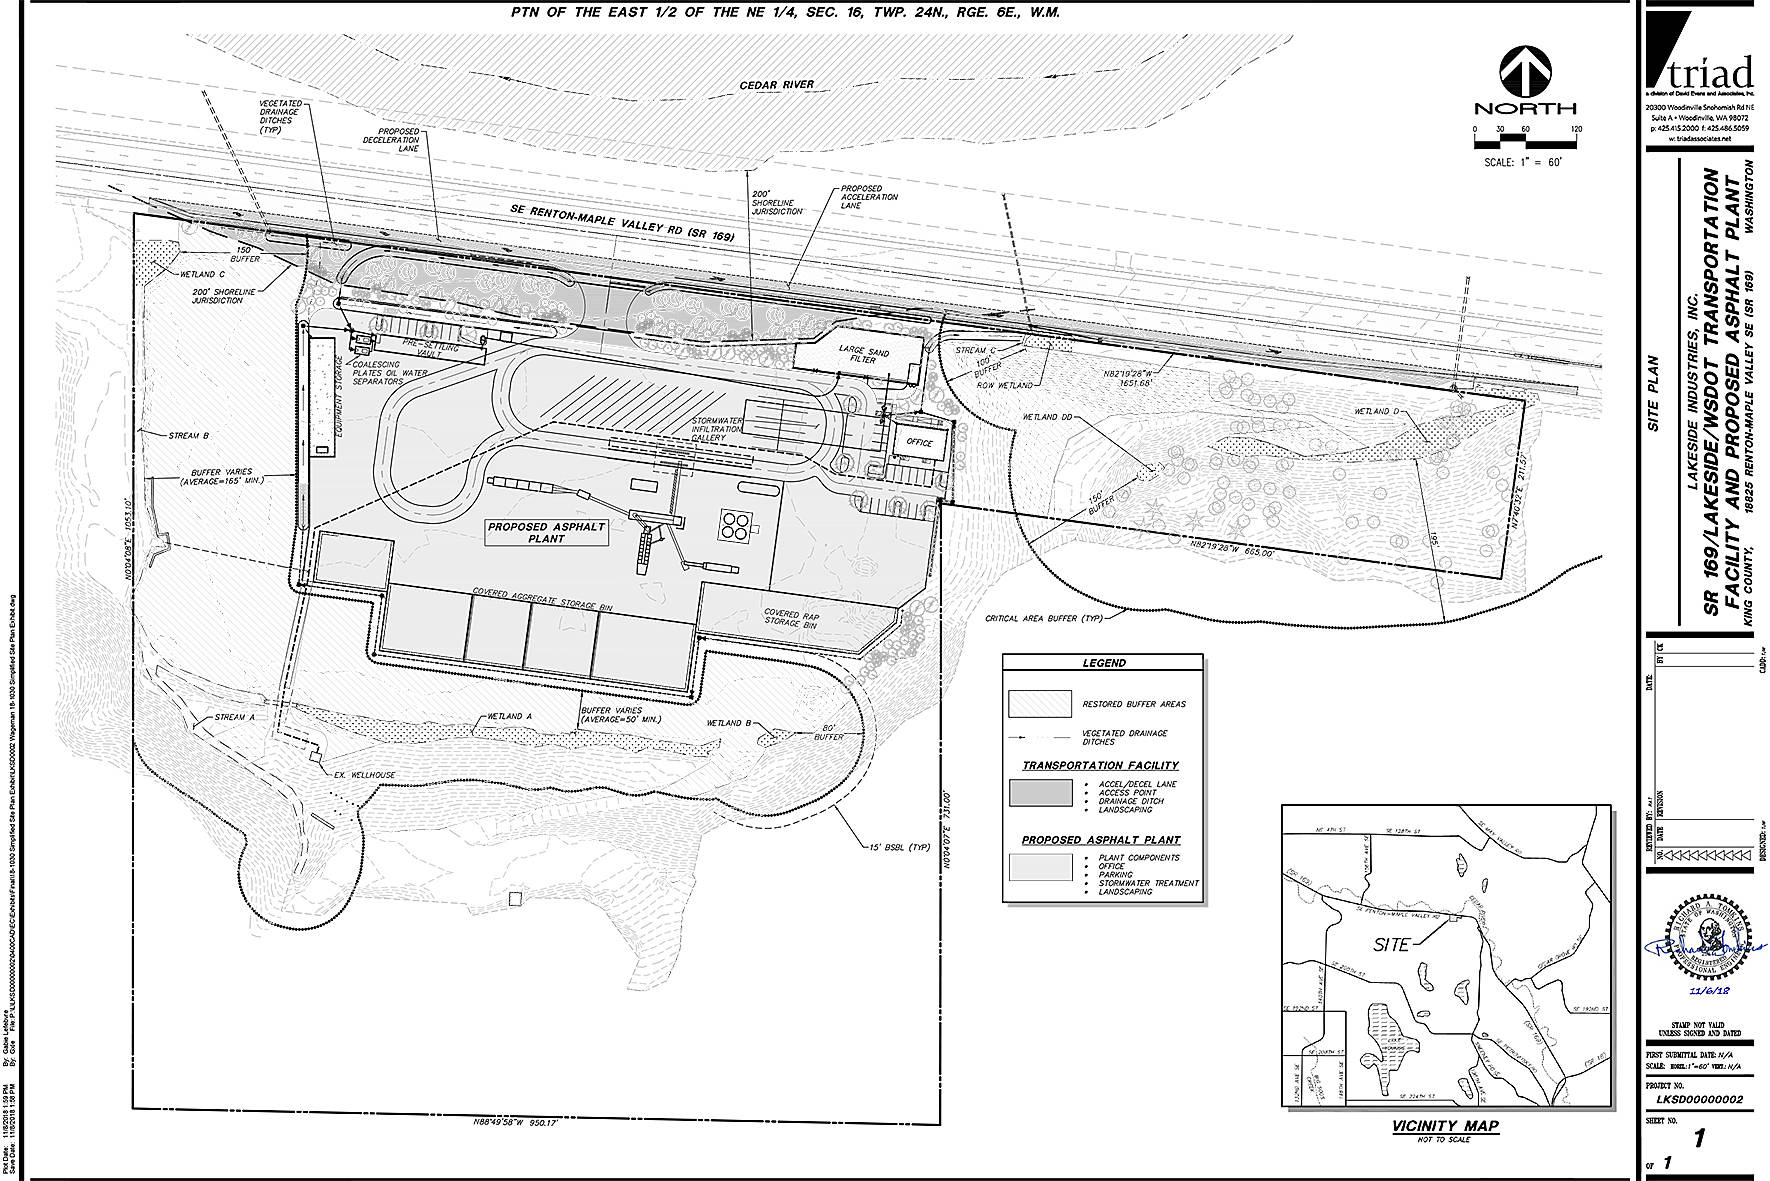 Lakeside’s site plan for the proposed asphalt plant. Submitted photo from Lakeside Industries.